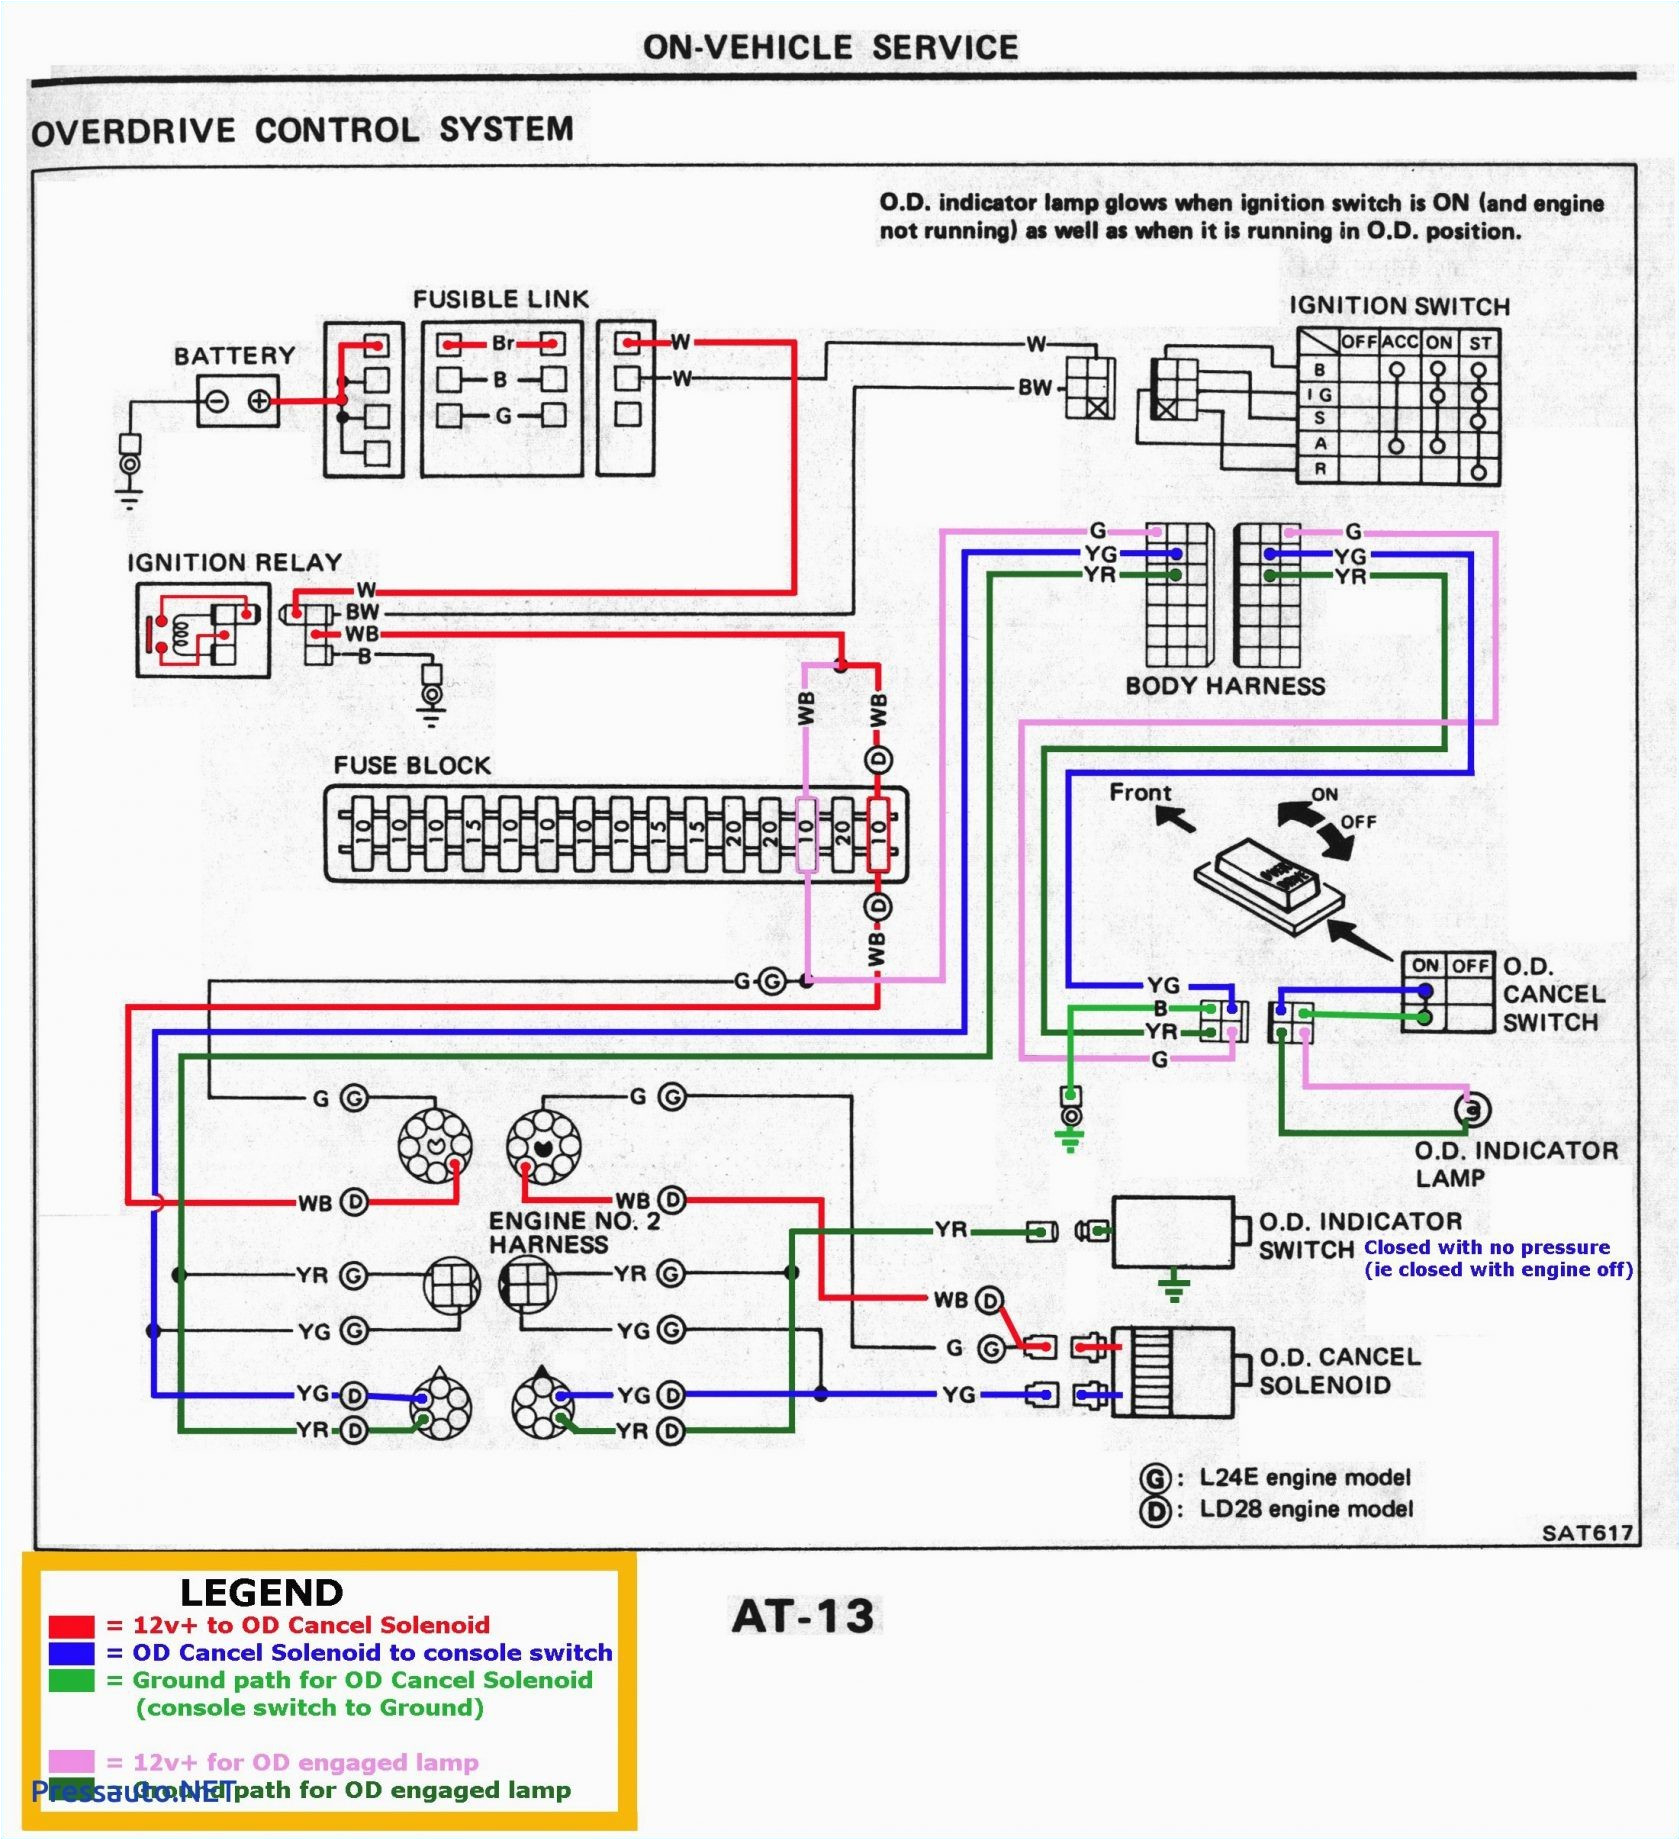 Wiring Diagram for 7 Prong Trailer Plug Volvo 850 Radio Wiring Harness Diagram On 7 Pin Trailer Ke Wiring